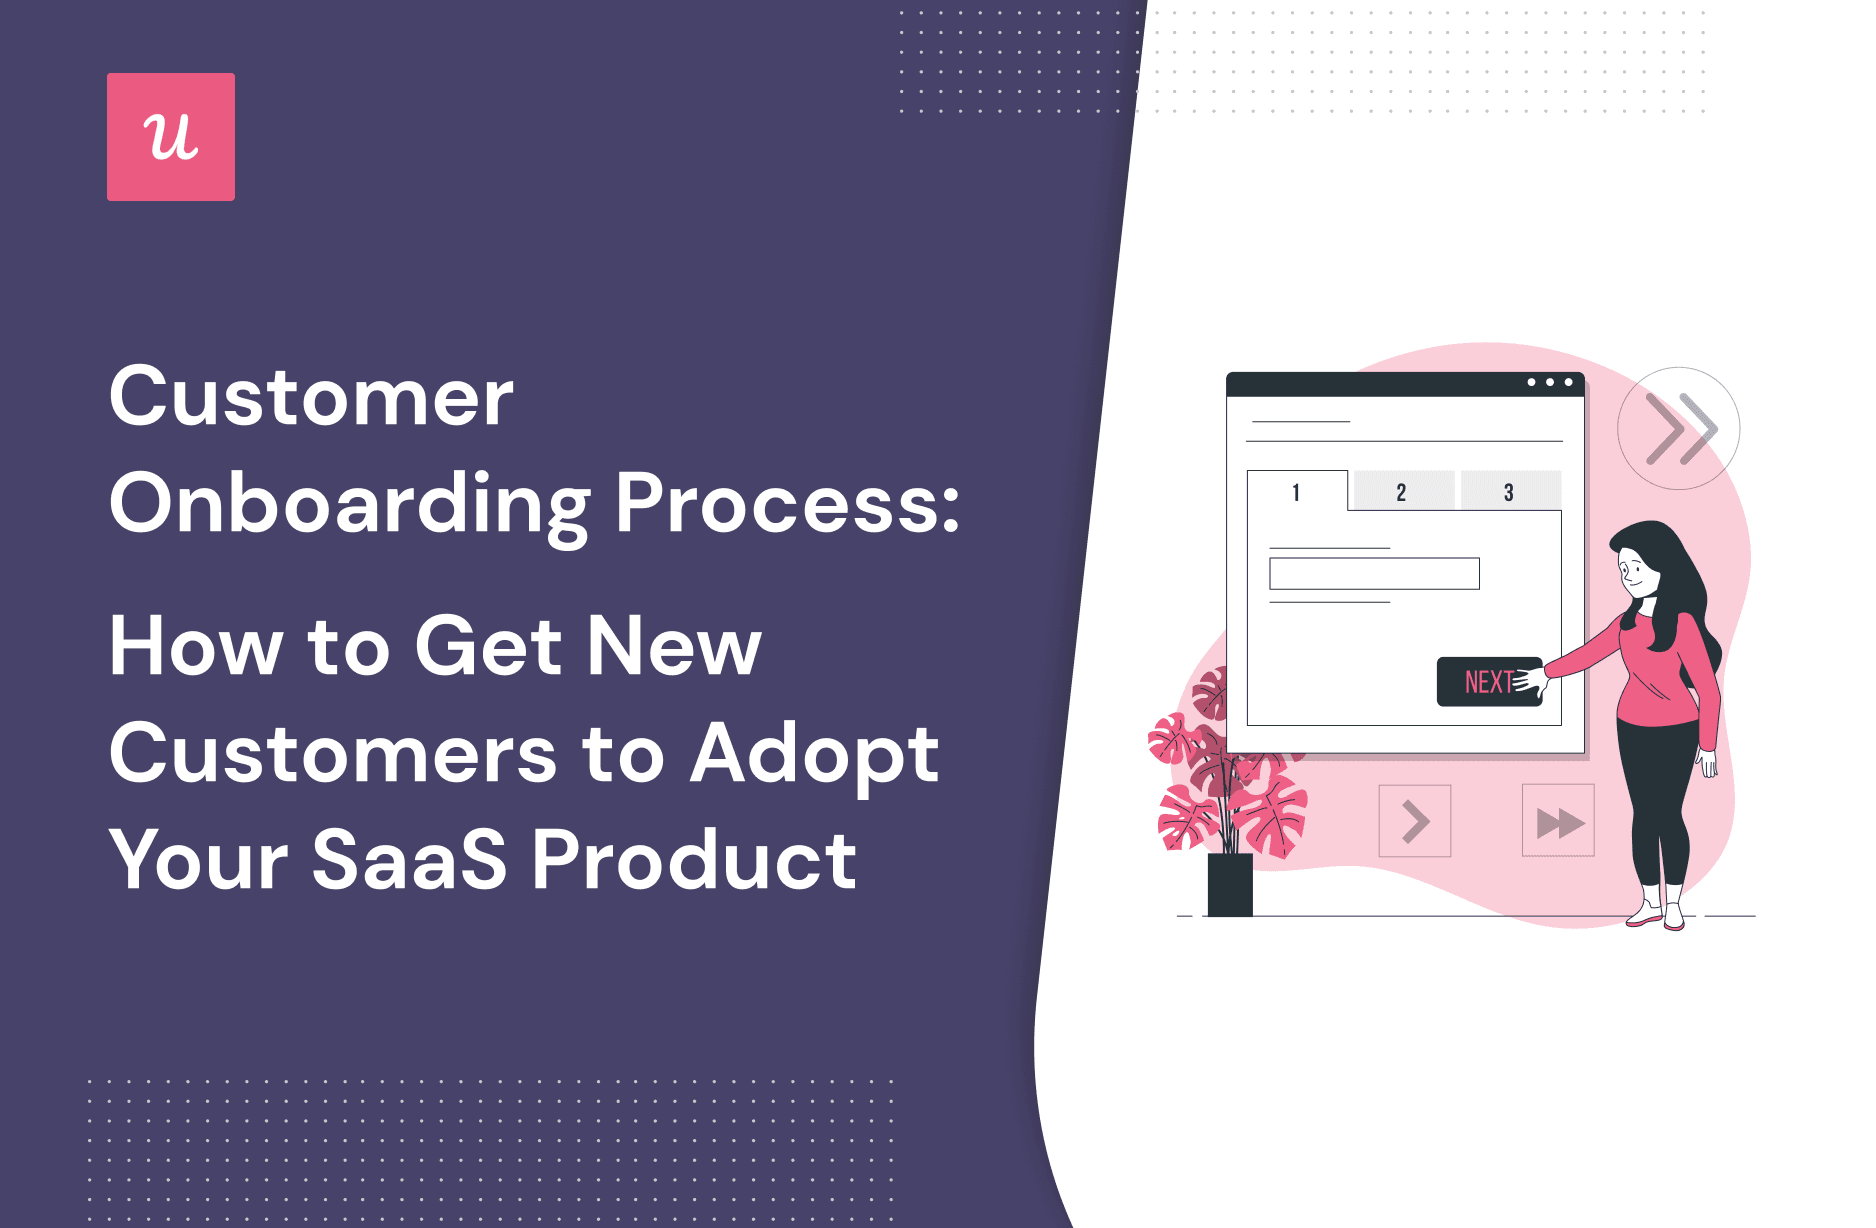 Customer Onboarding Process: How to Get New Customers to Adopt Your SaaS Product cover